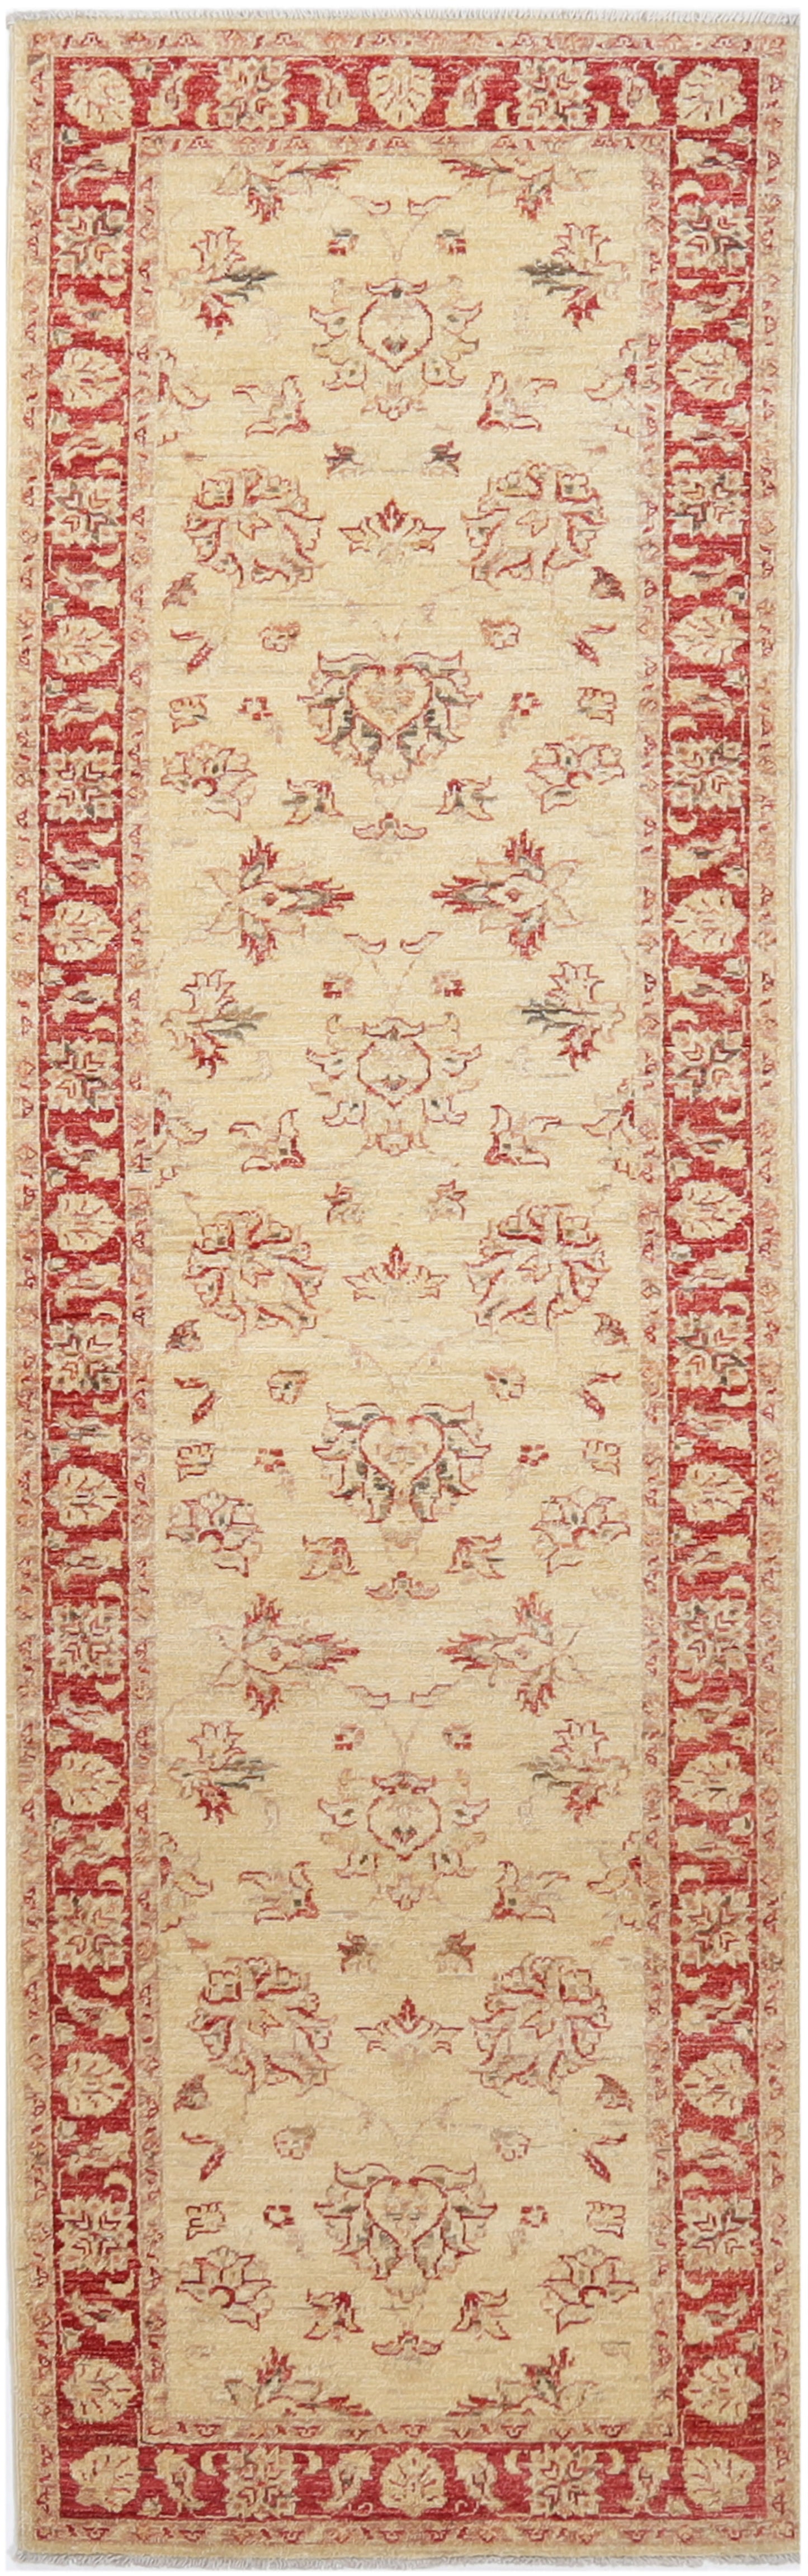 2.5X10 Hand-Knotted Ariana Carpet Traditional Beige Fine Wool Runner Rug D44466